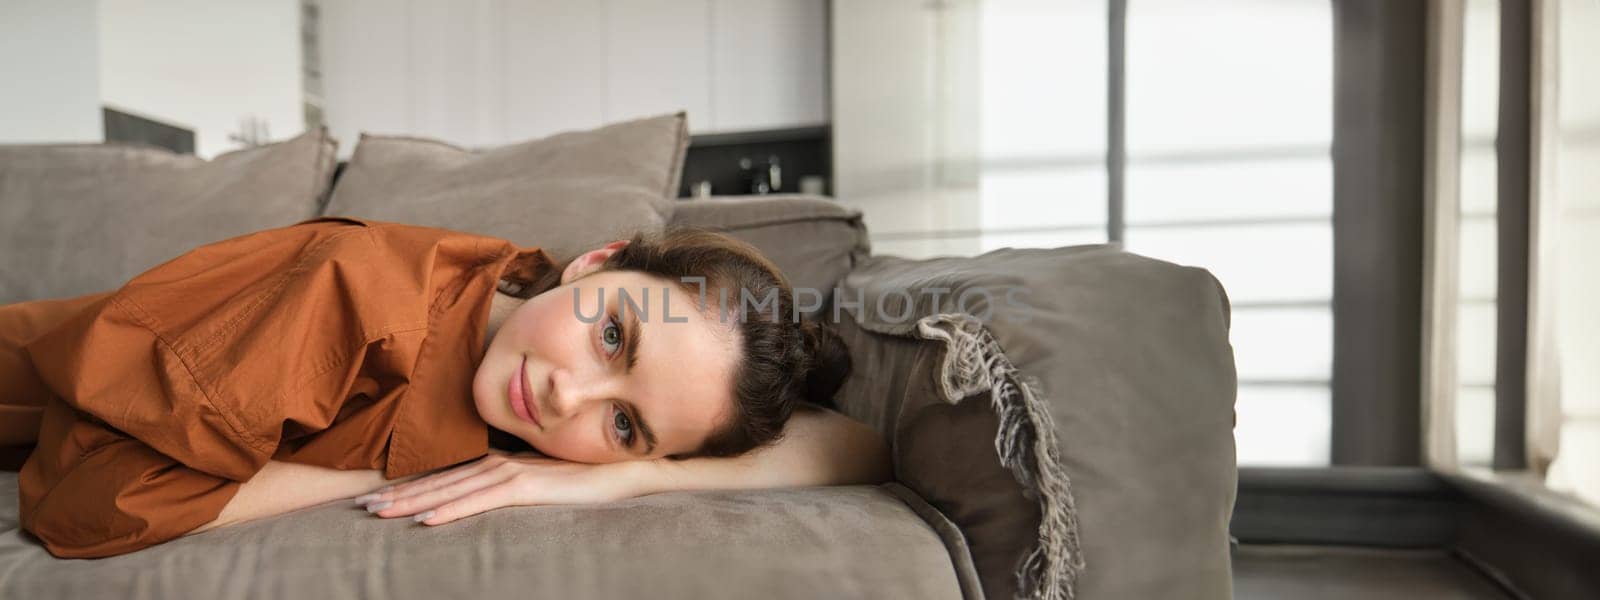 Portrait of beautiful smiling woman, resting at home, lying on couch, relaxing on weekend, looking at camera with happy face.